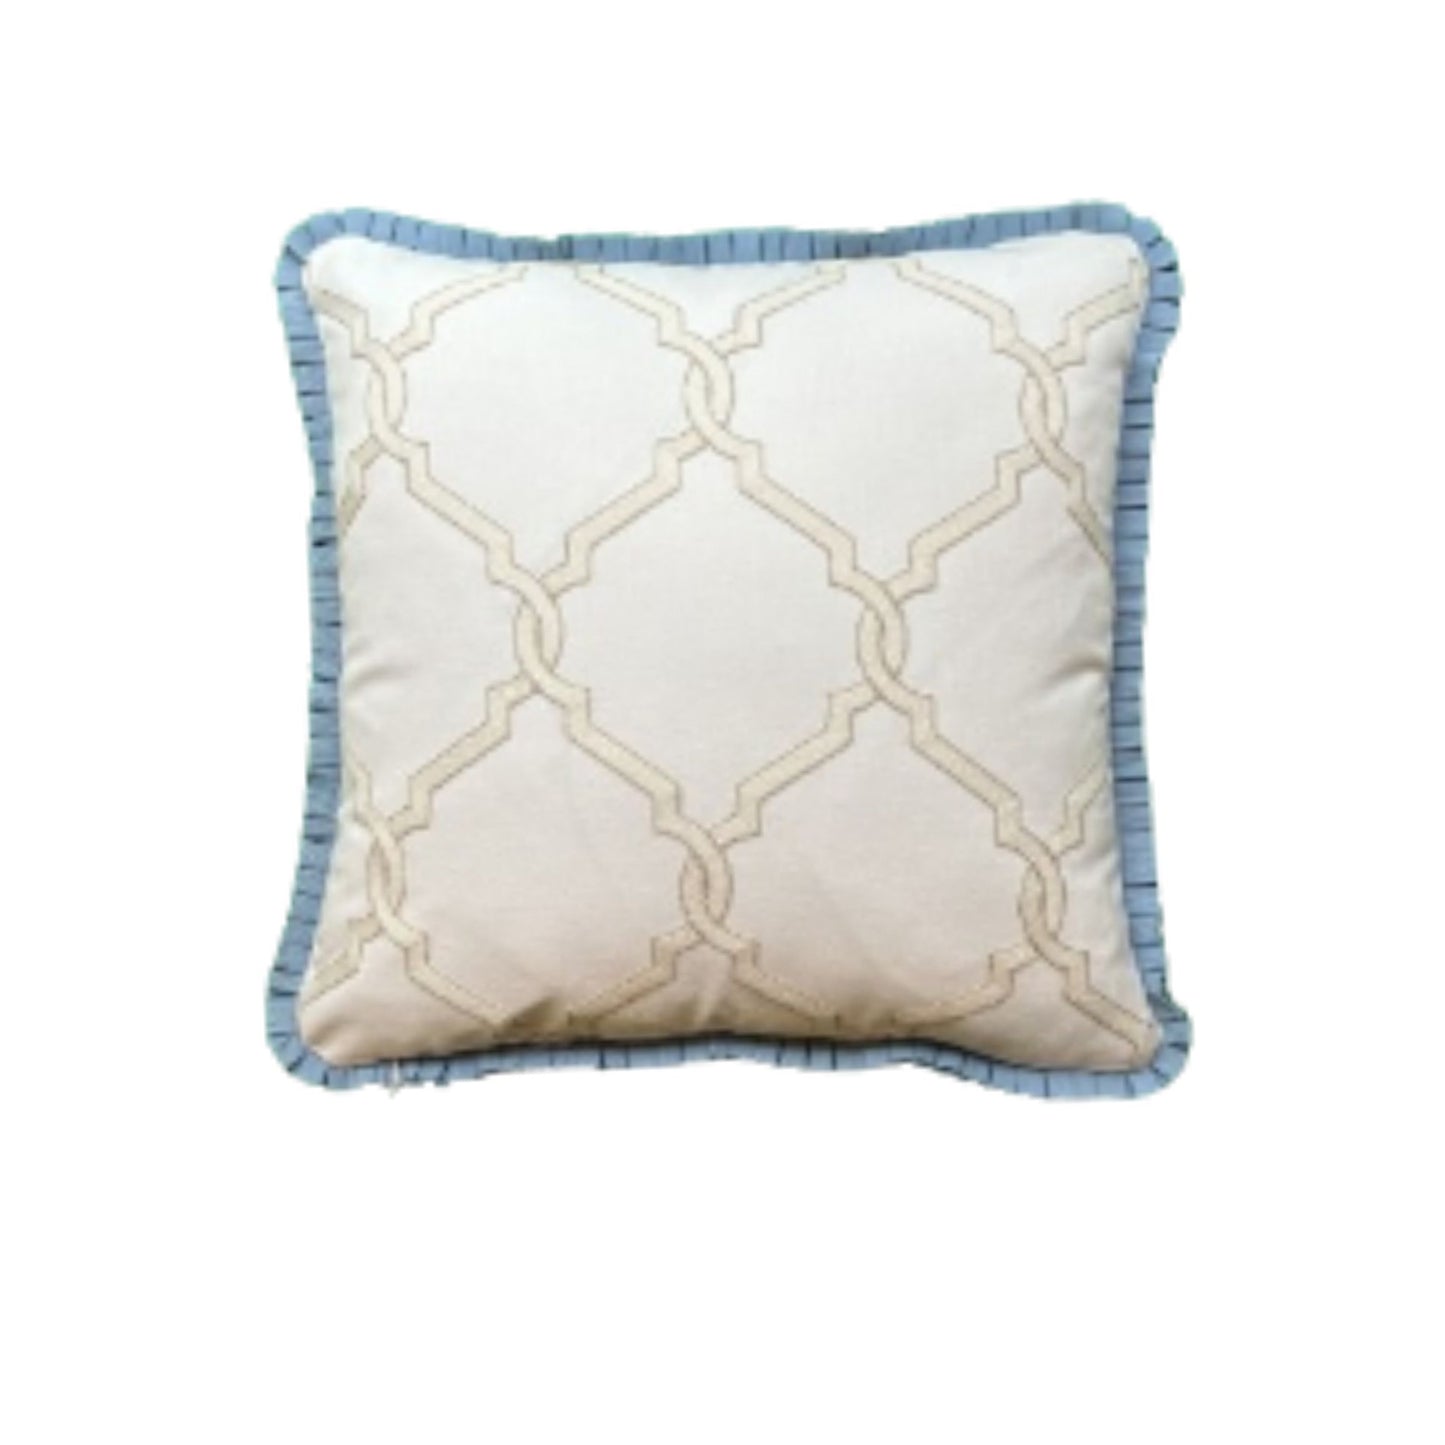 Colefax & Fowler Summerby Twisted Branch Blue Chintz 18 x 18 Square Designer Throw Pillow with Down Feather Insert